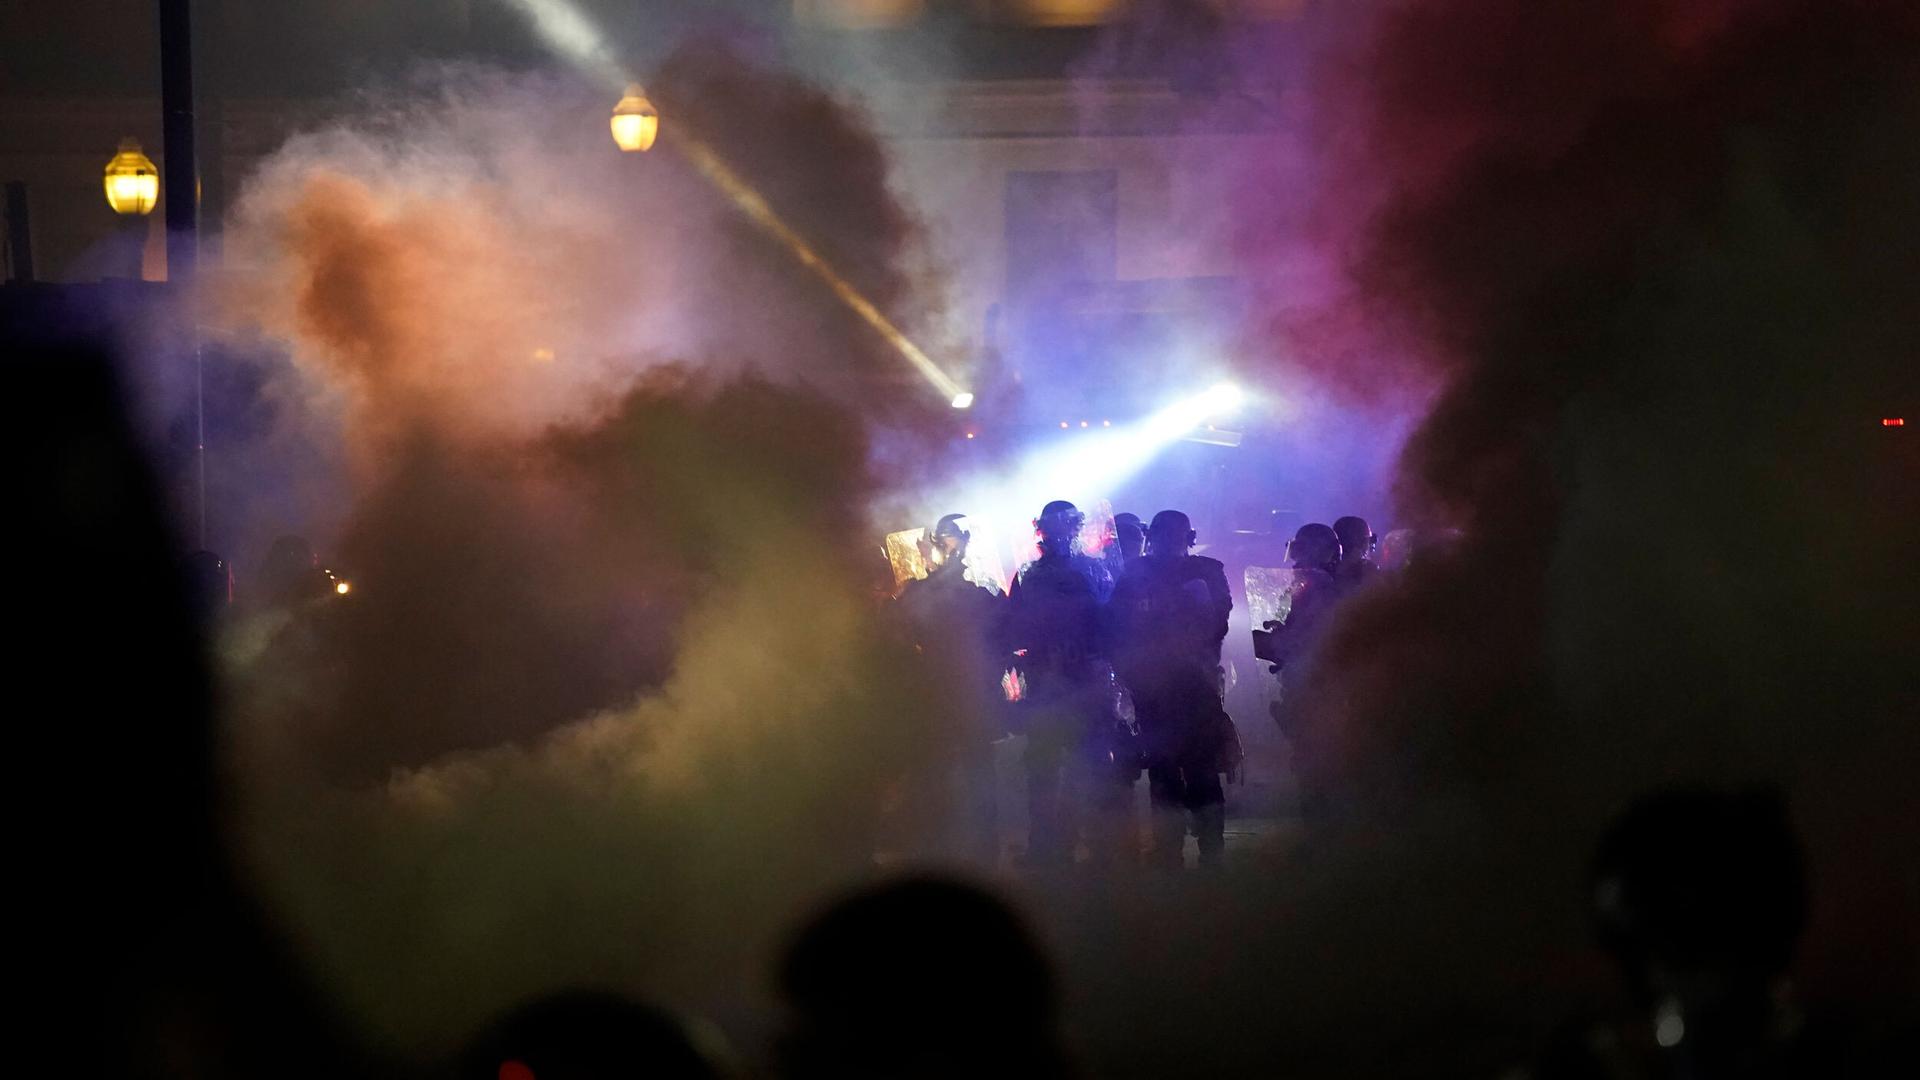 Police in riot gear clear the area in front of Kenosha County Courthouse during clashes with protesters in Kenosha, Wisconsin, Aug. 25, 2020.